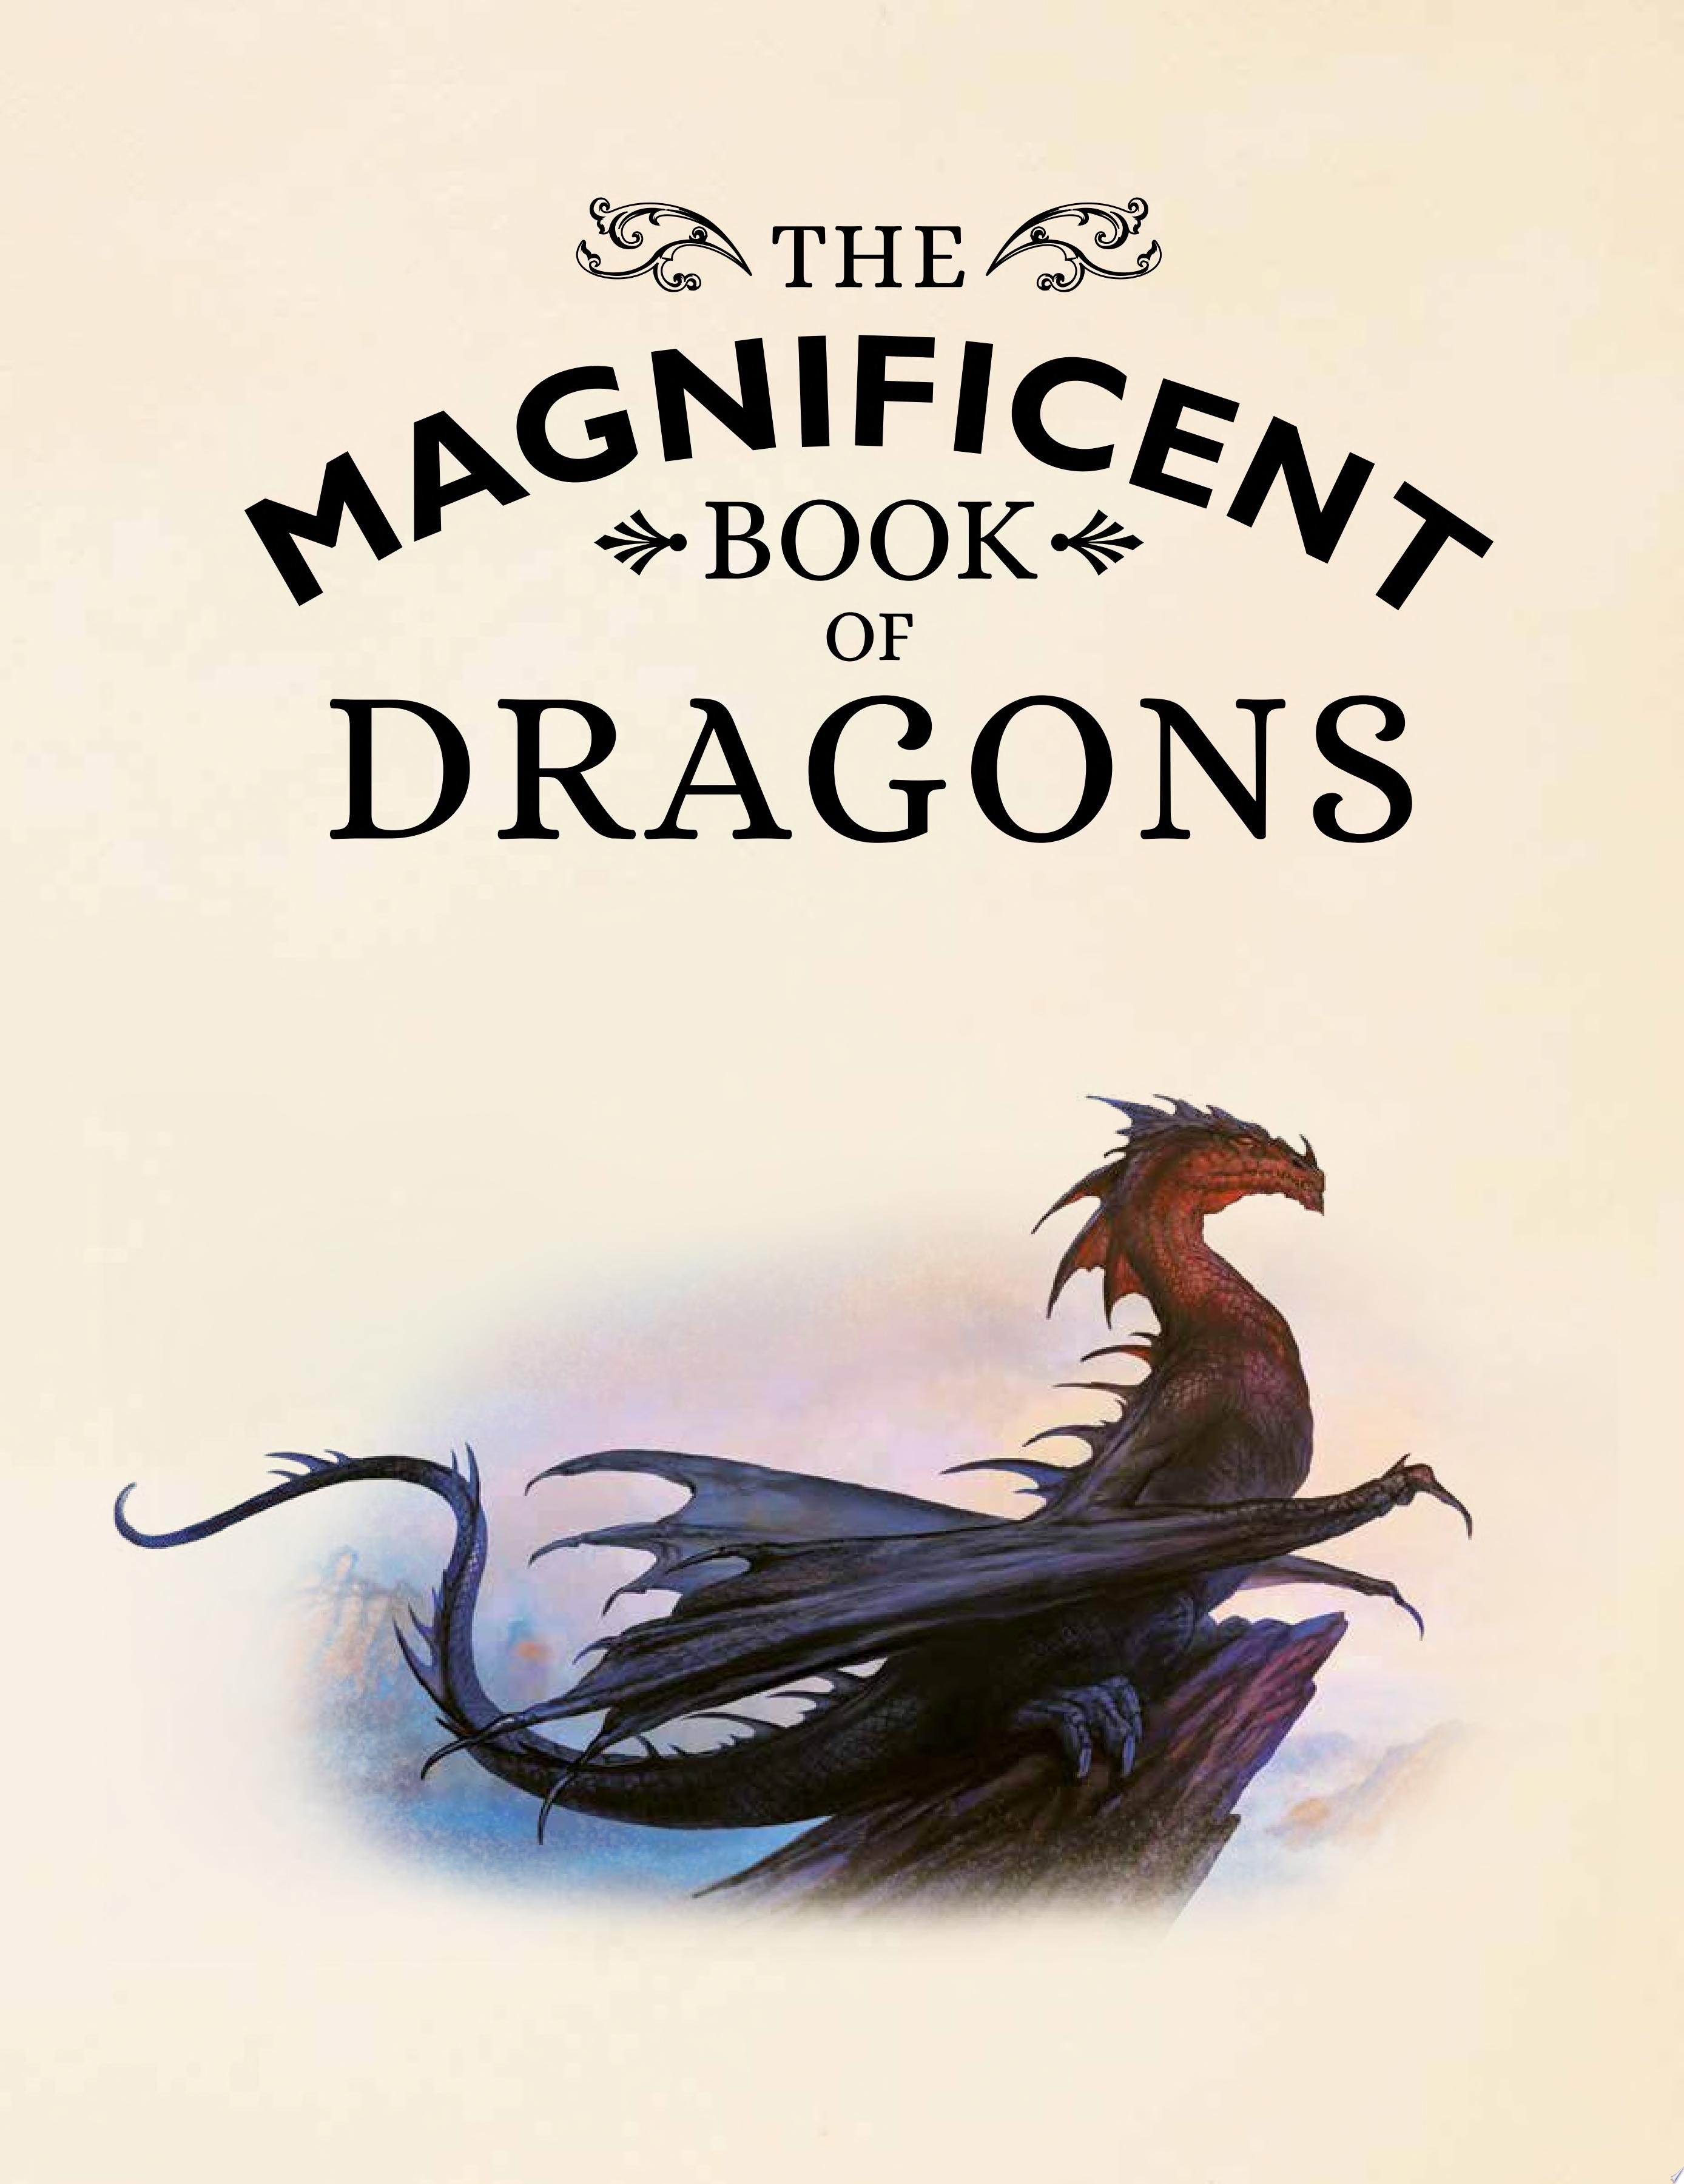 Image for "The Magnificent Book of Dragons"